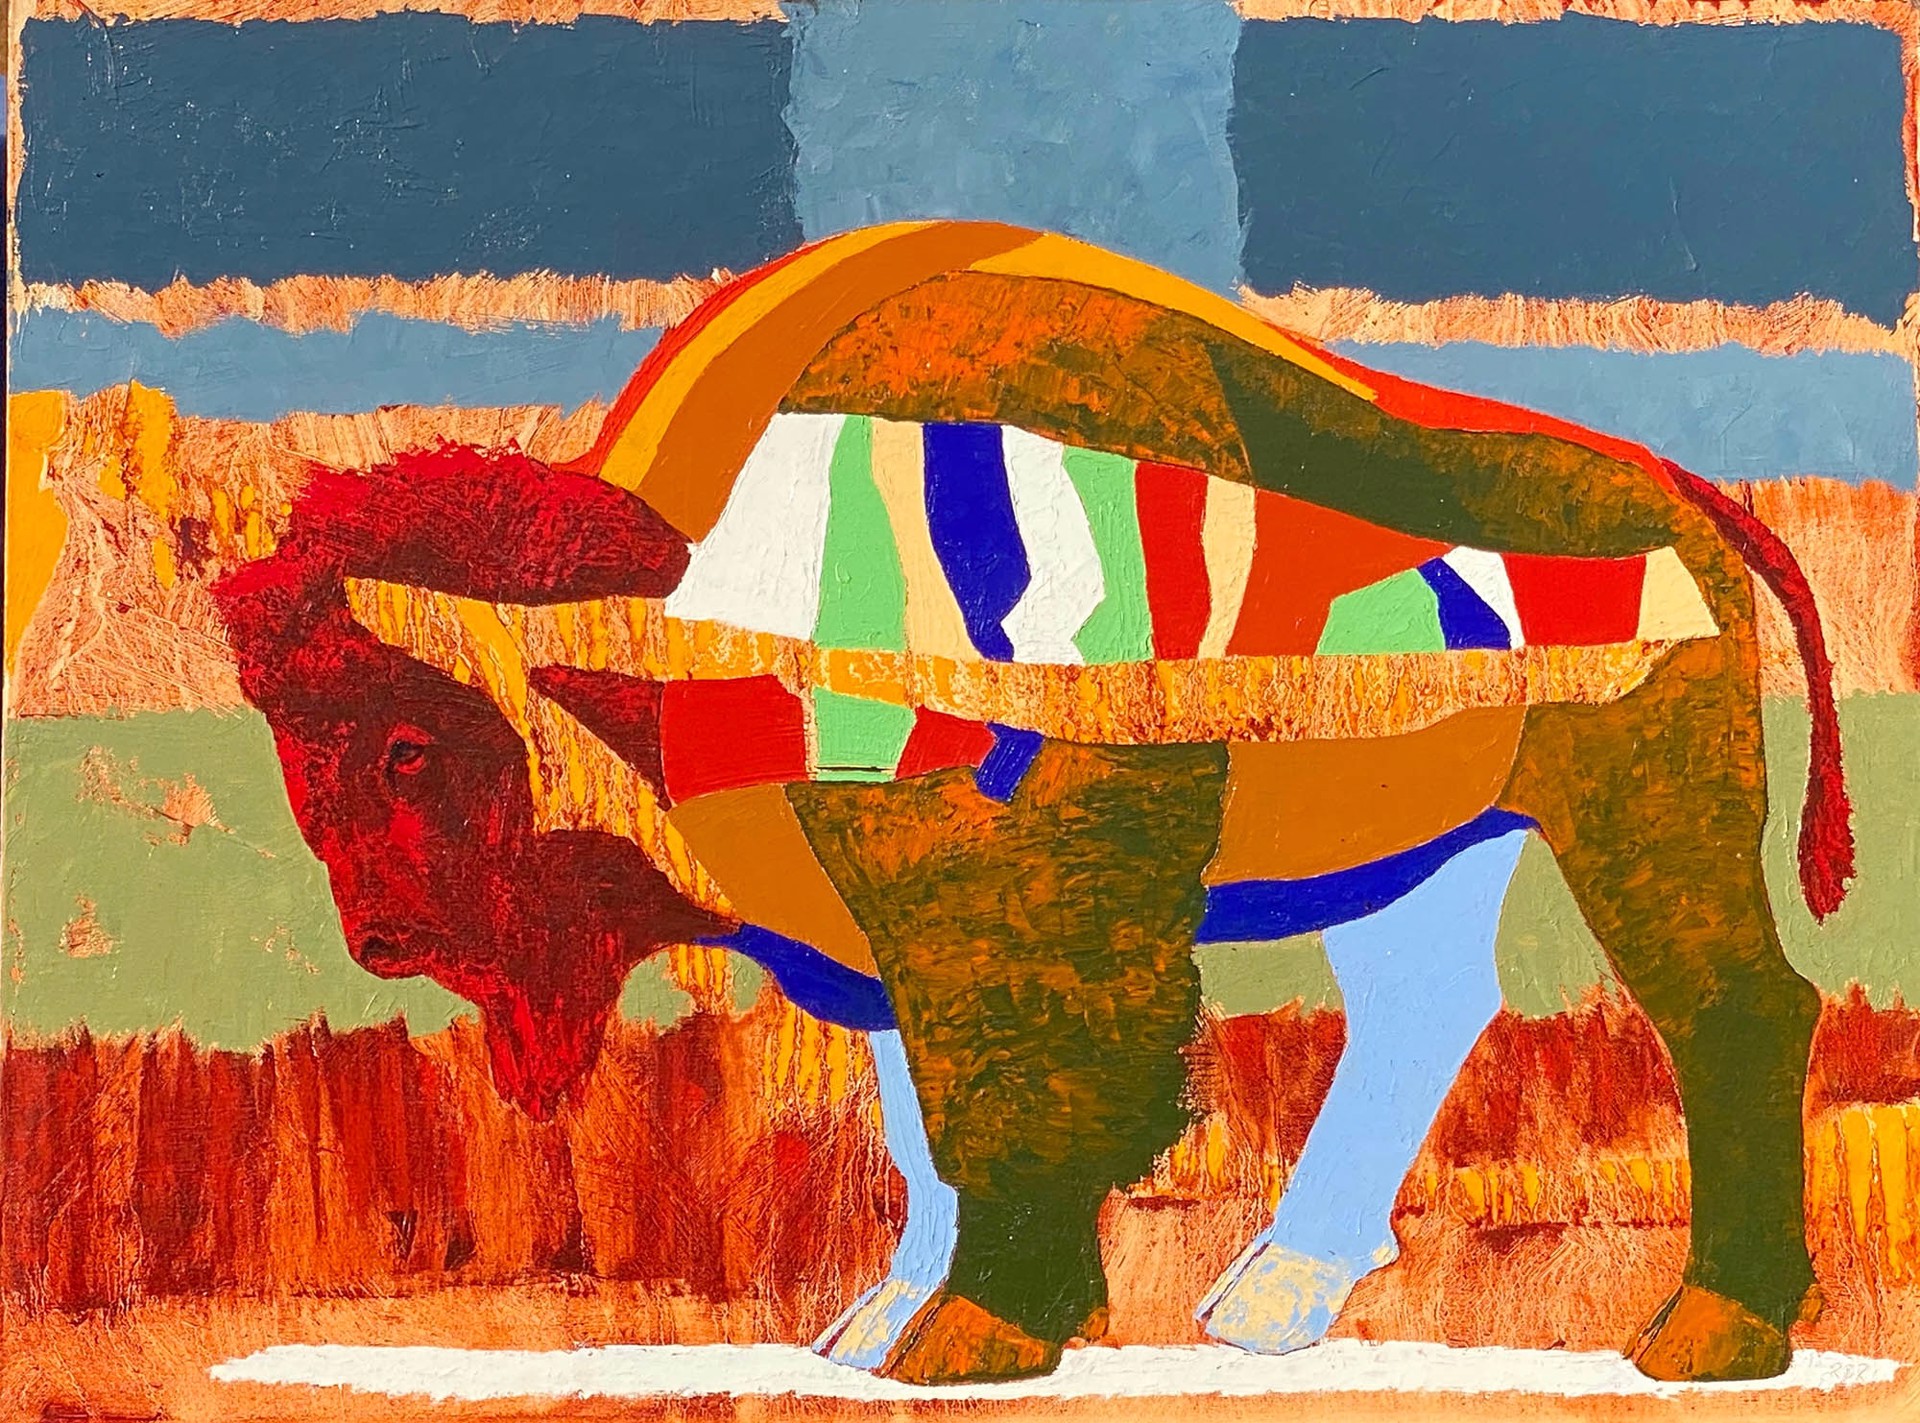 Original Oil Painting Featuring A Standing Bison In A Color Block Graphic Style